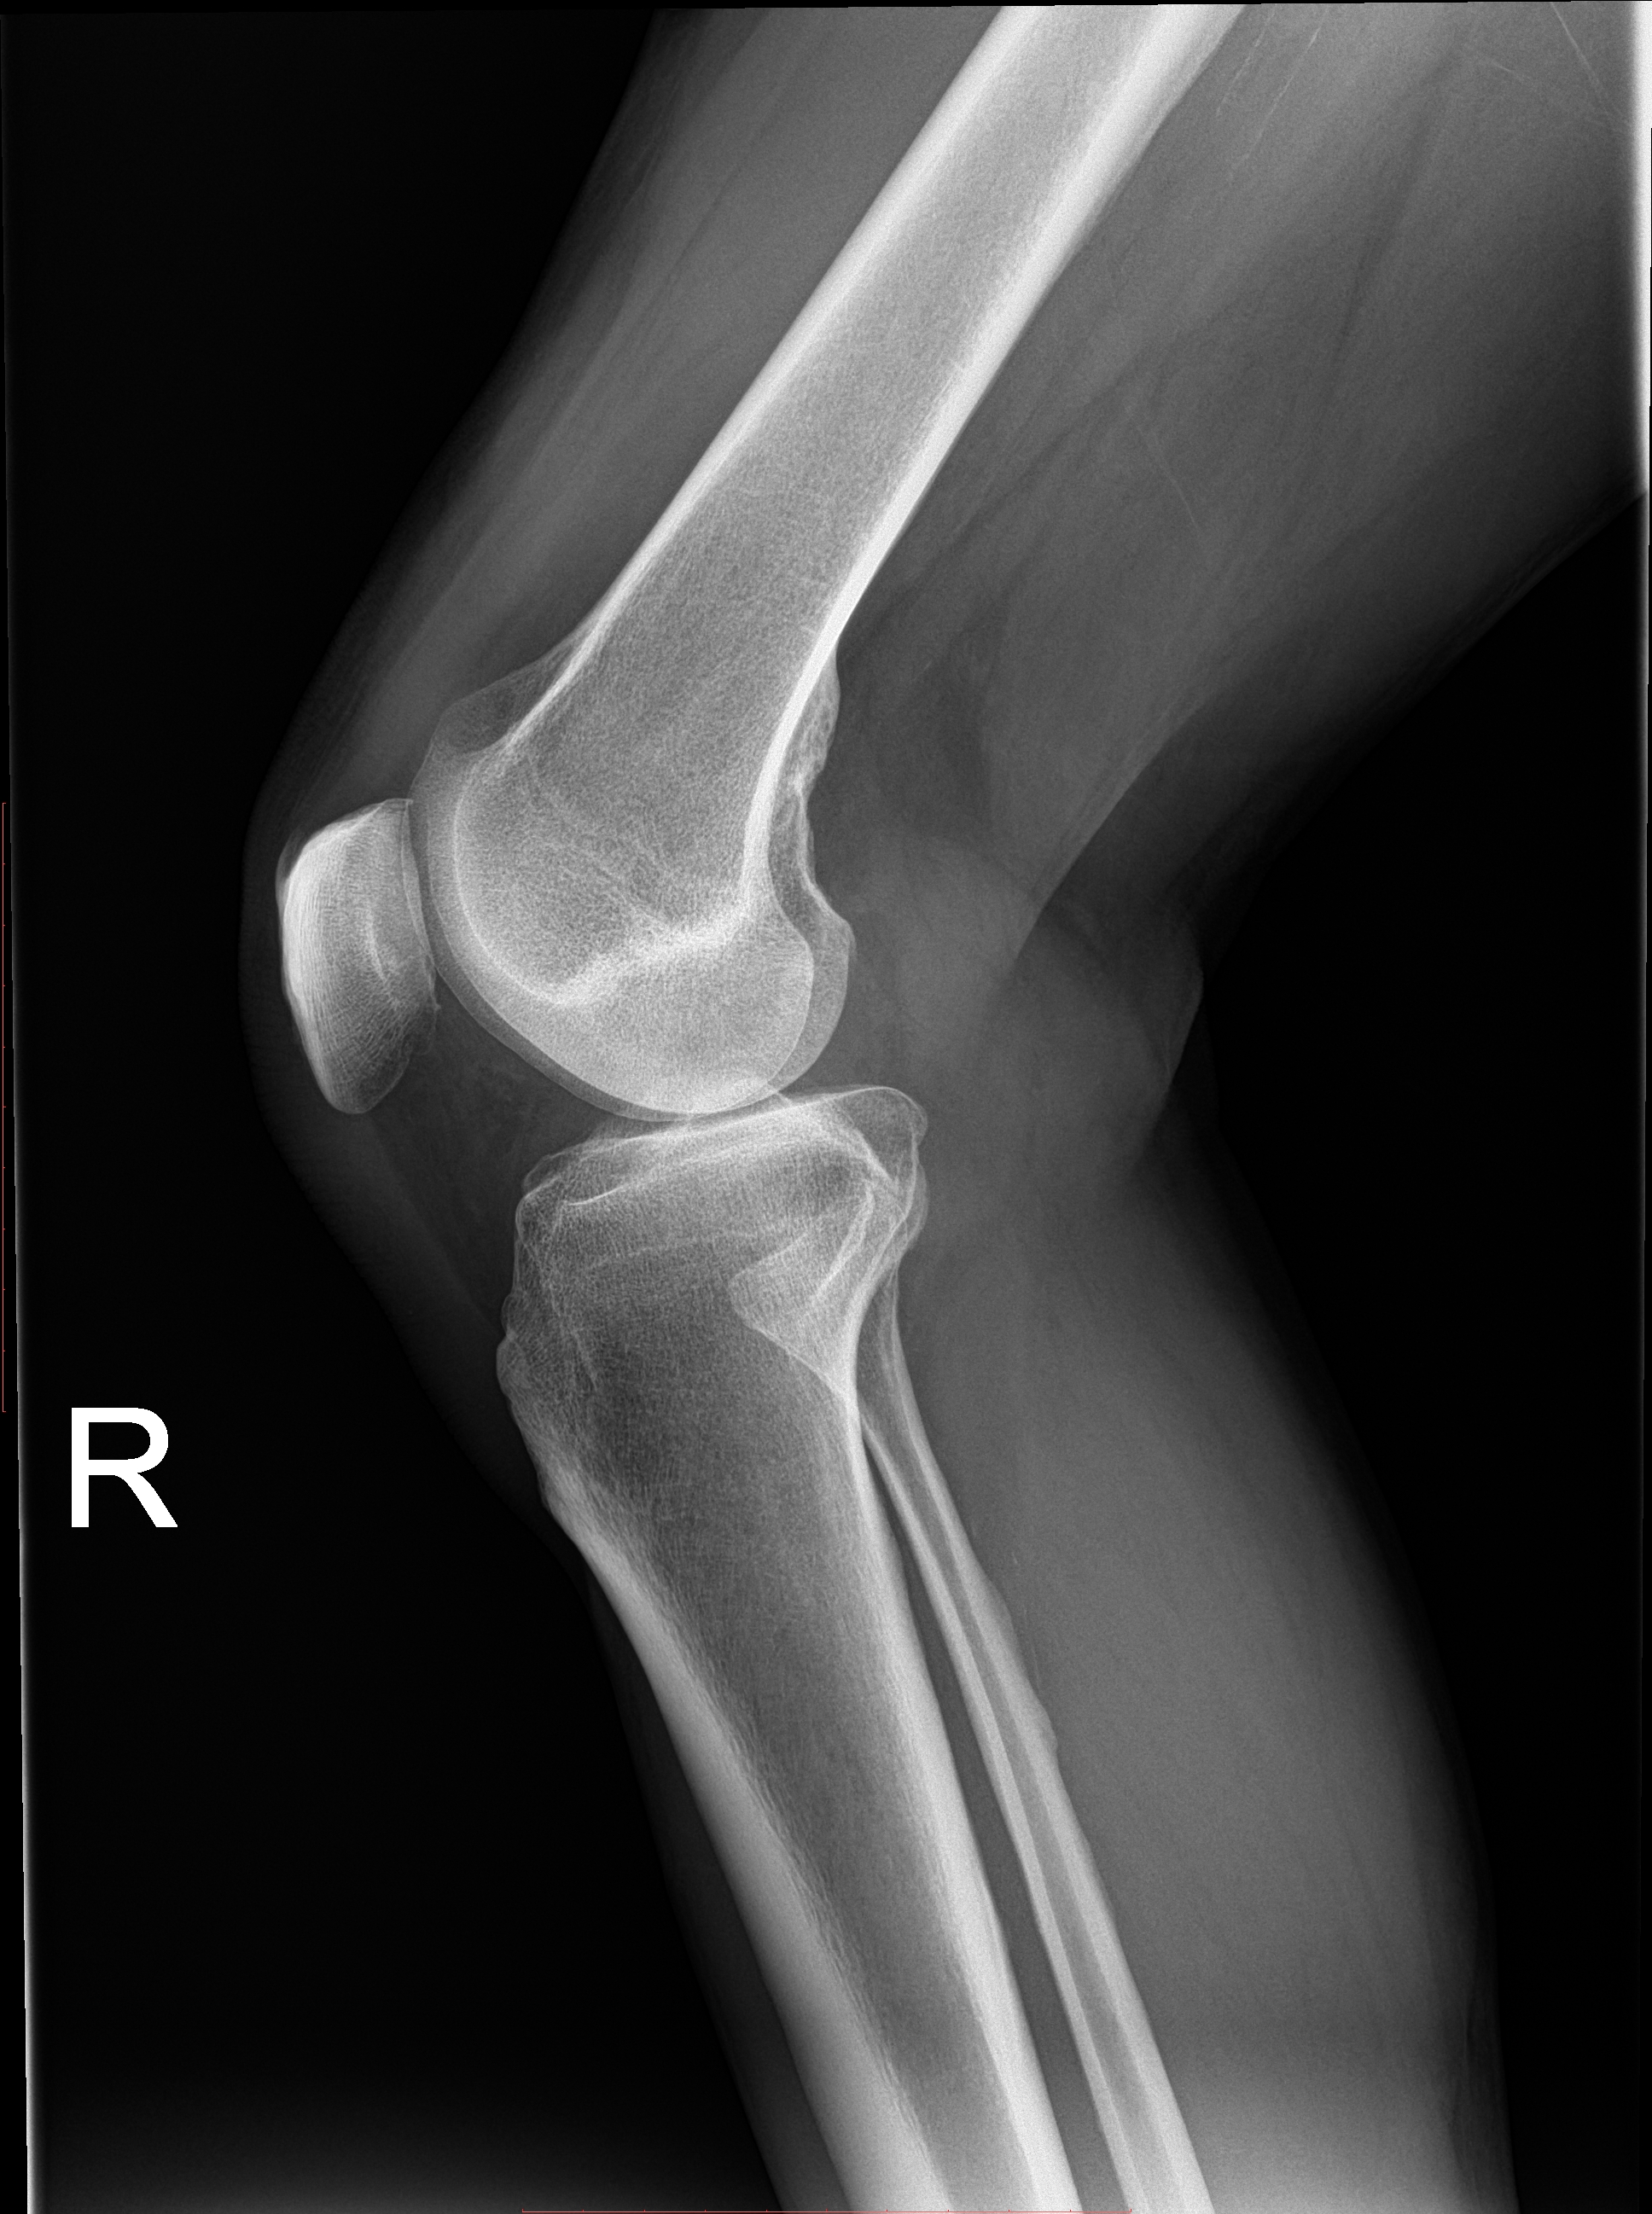 Algorithms for analysis of knee radiographs